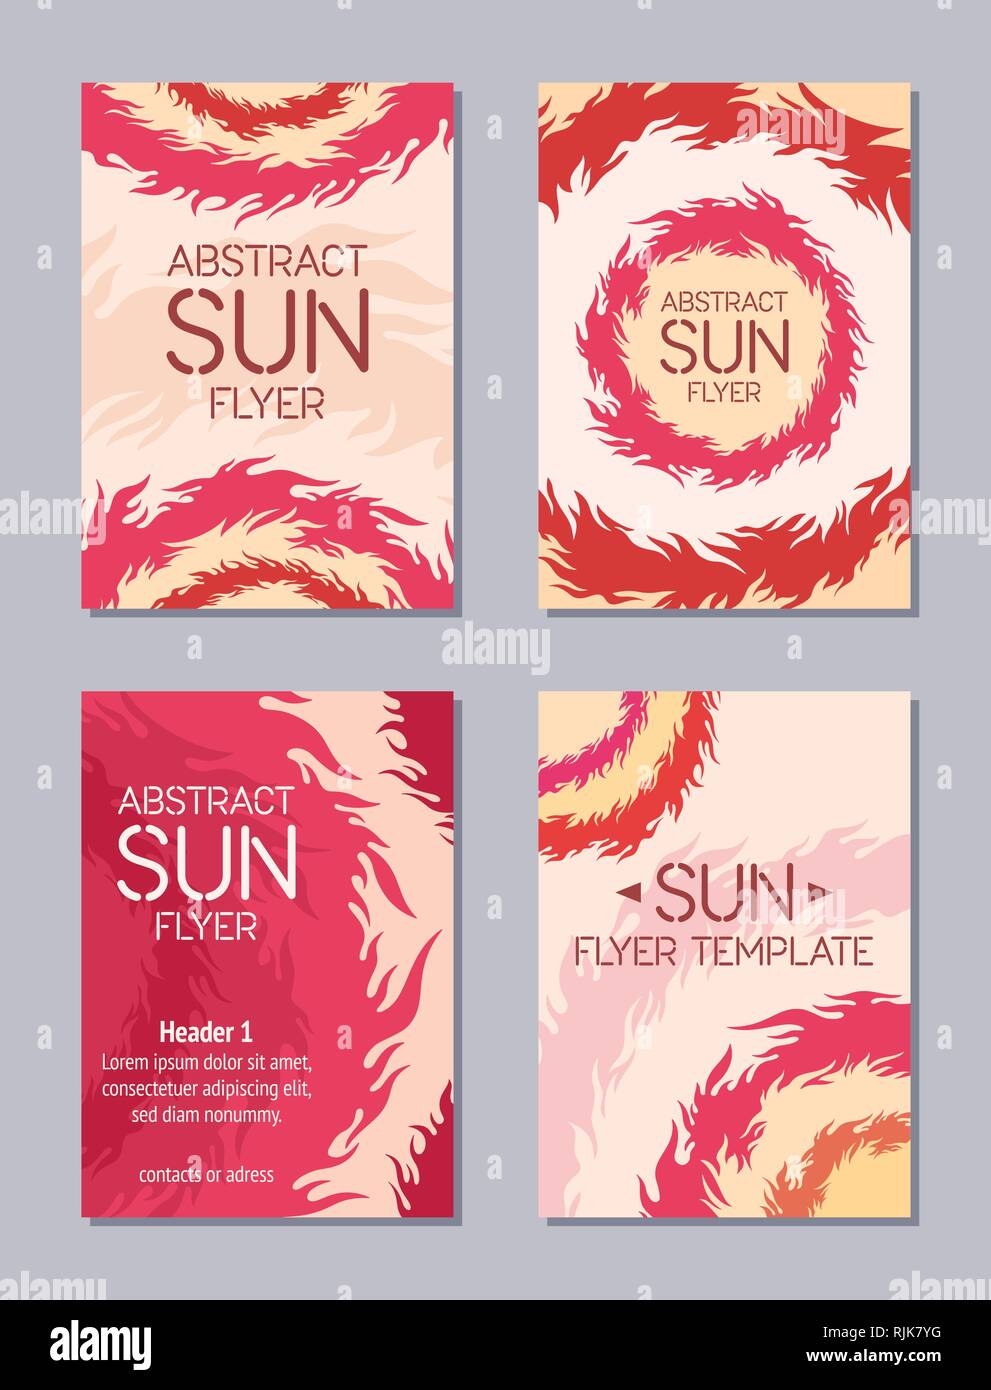 Set of four flyers with sun theme. Flaming circles. Stylized suns. Abstract background. Vector illustration. Stock Vector